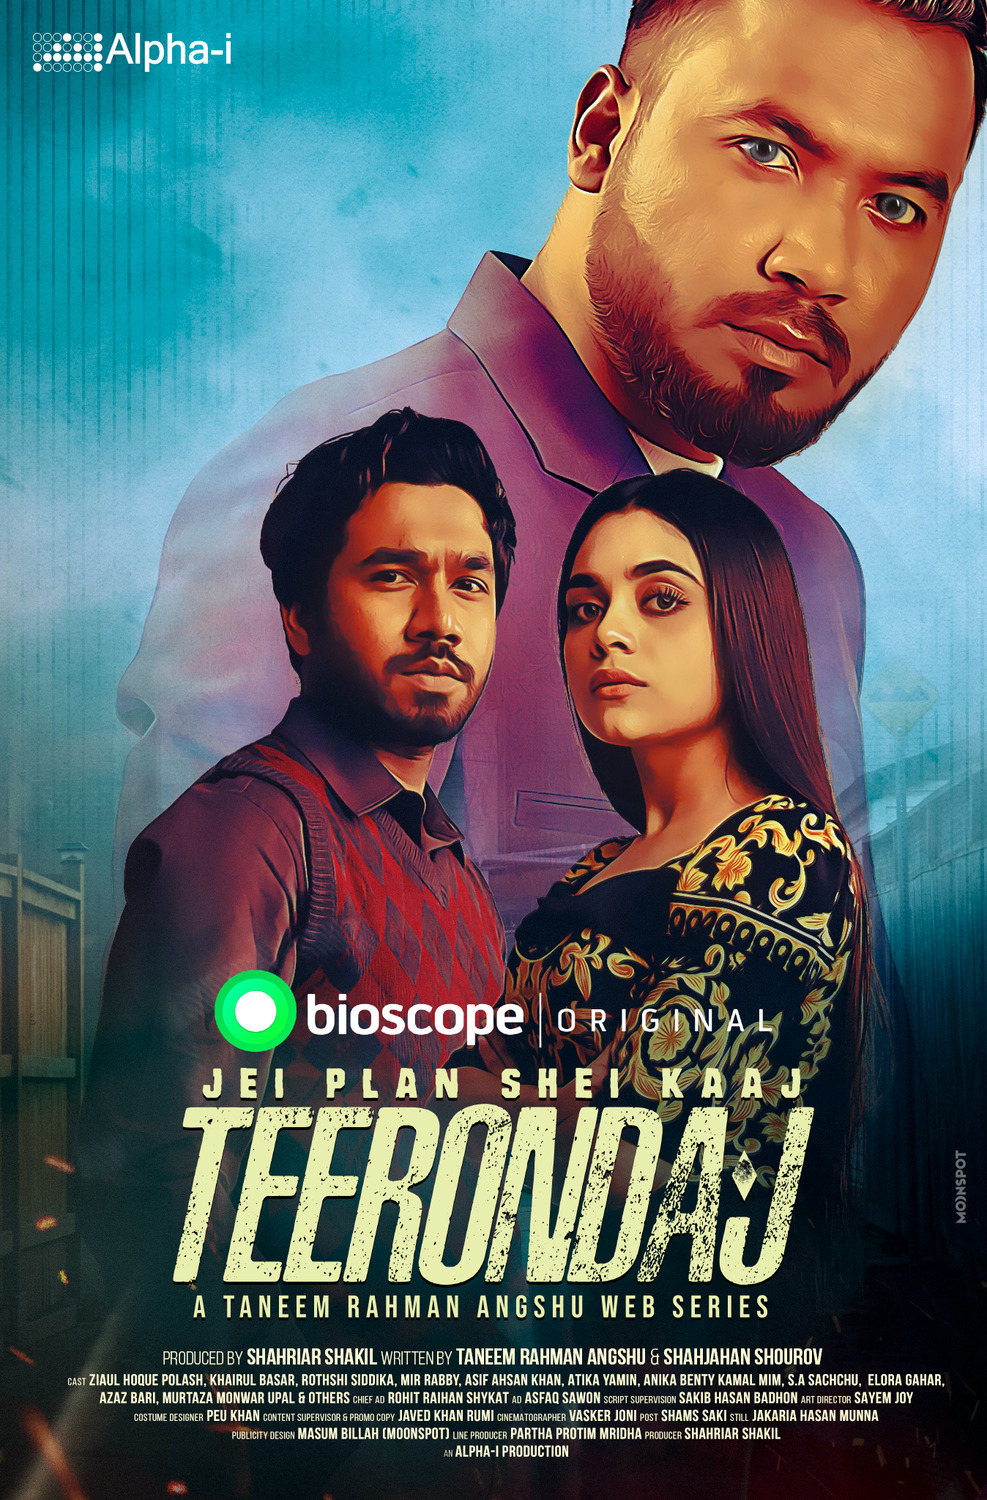 Extra Large TV Poster Image for Teerondaj (#4 of 4)